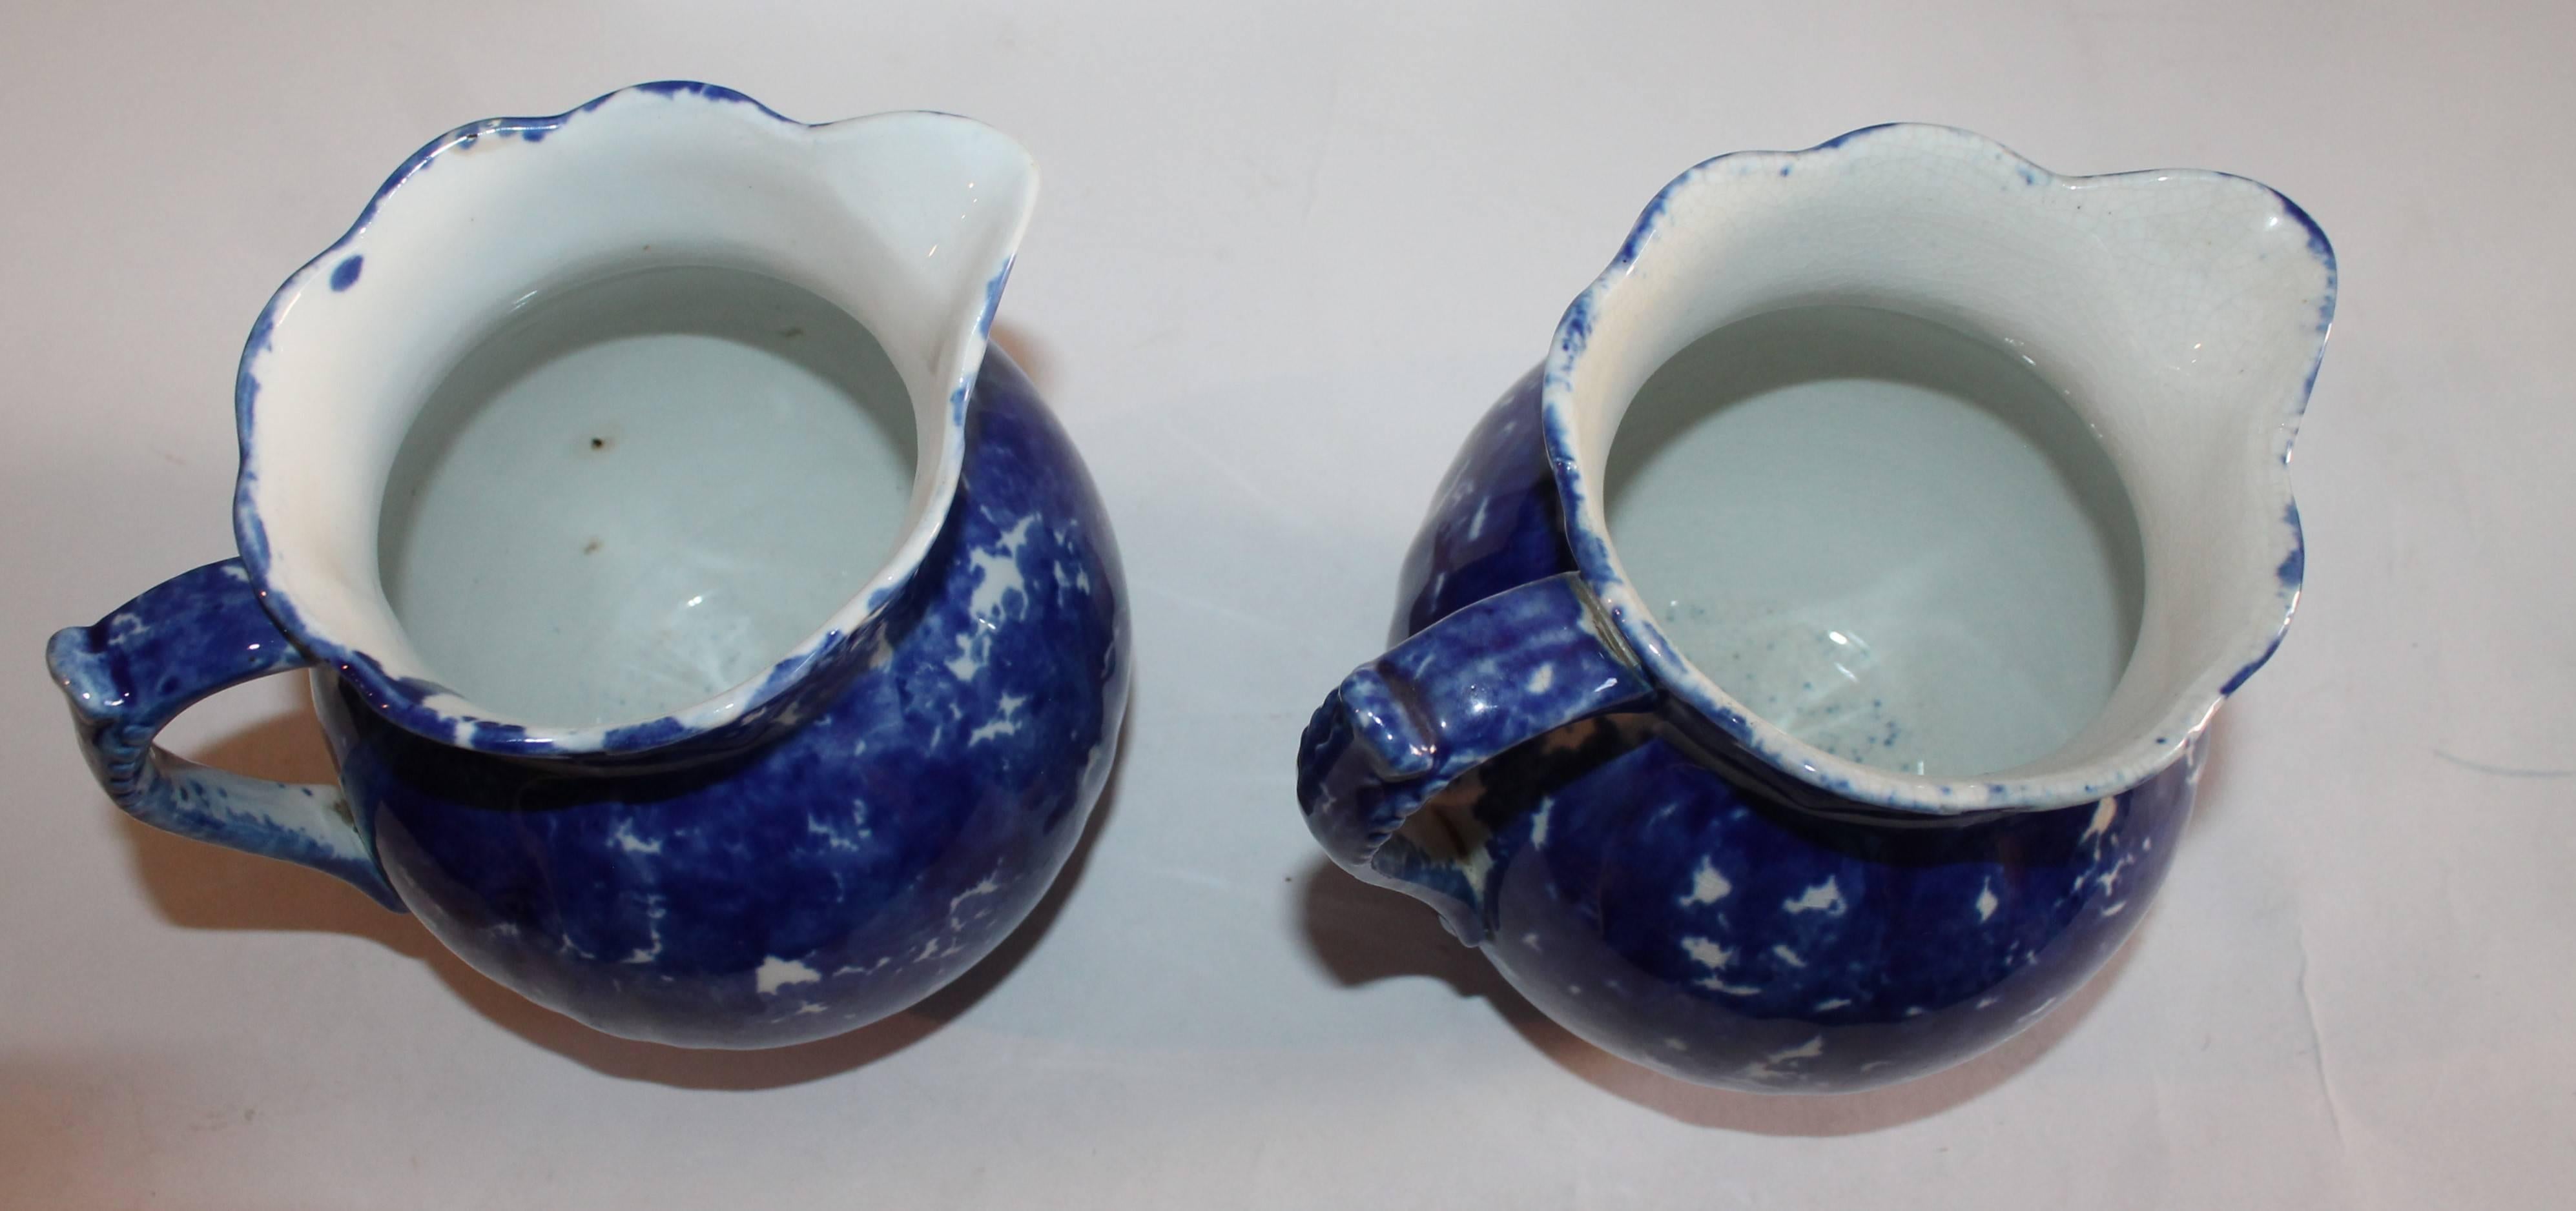 Sponge Ware Pottery Pitchers, 19th Century, Pair For Sale 1